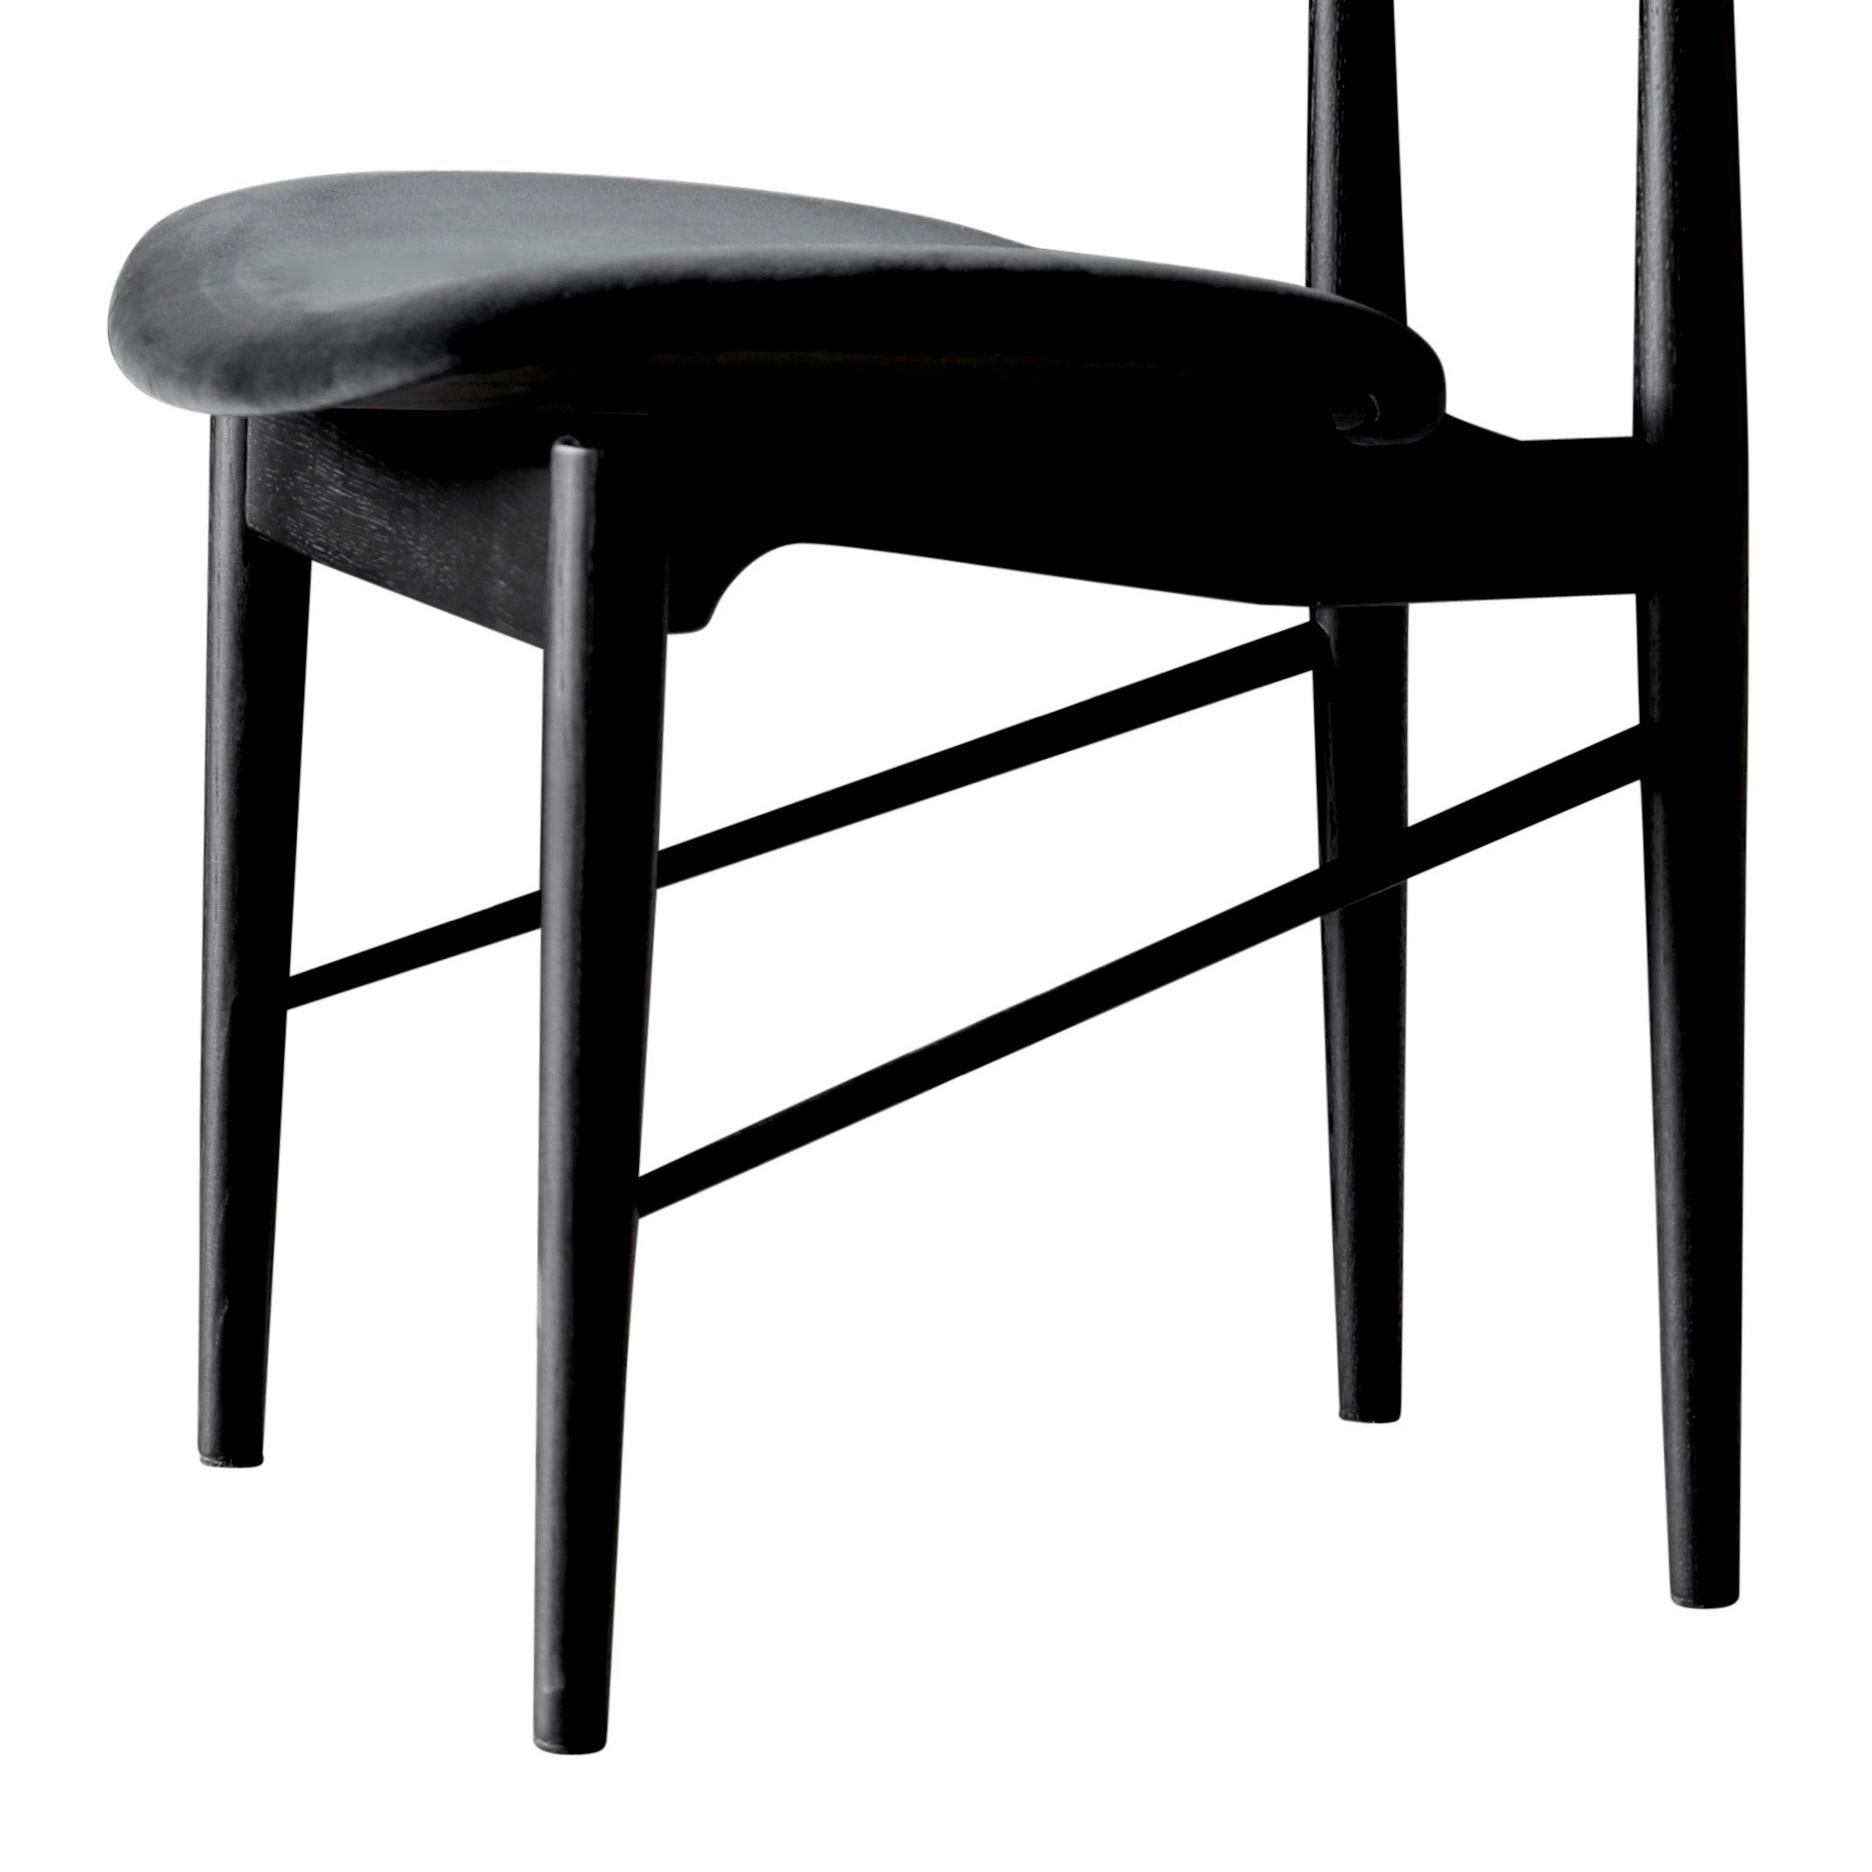 Armchair designed by Finn Juhl in 1953, relaunched in 2015.
Manufactured by House of Finn Juhl in Denmark.

In 1953, Finn Juhl designed this simple yet elegant dining chair for the furniture manufacturer Bovirke, which we have relaunched under the